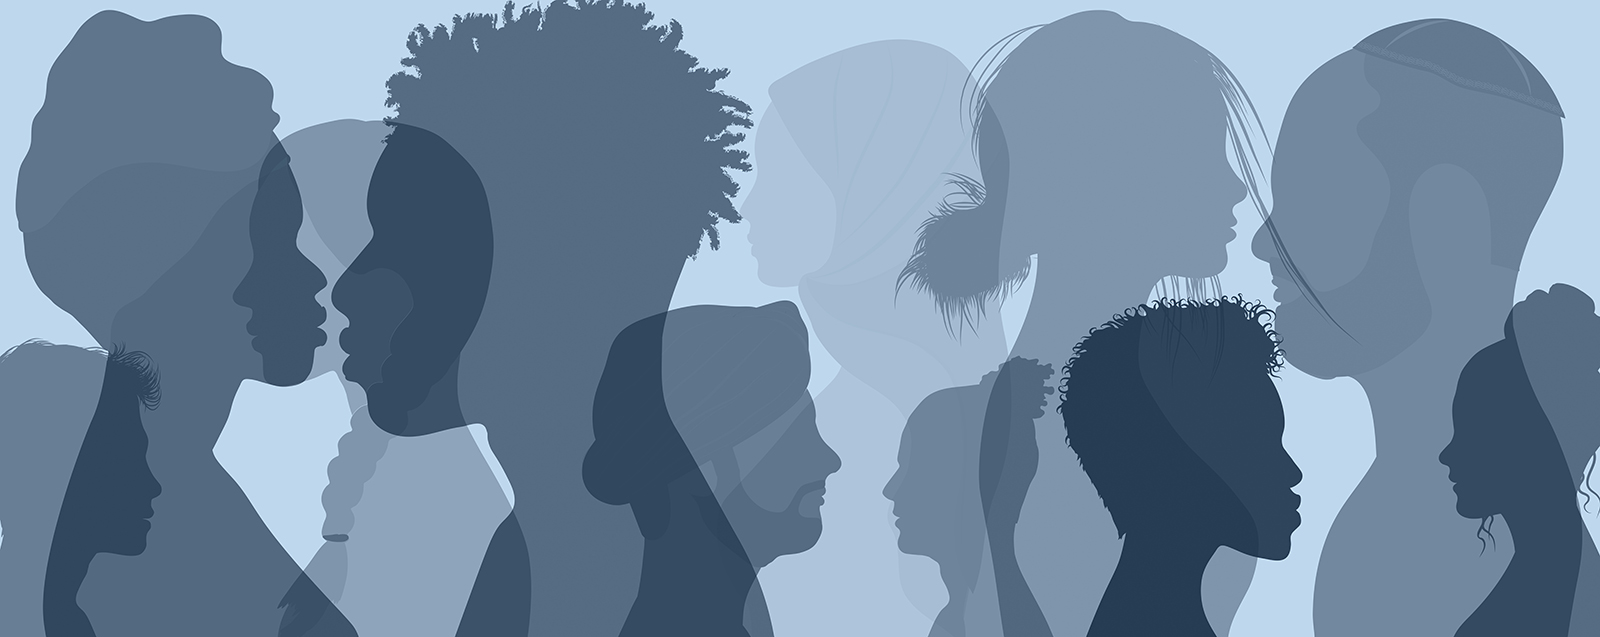 Collage of people's side profiles with a blue overlay